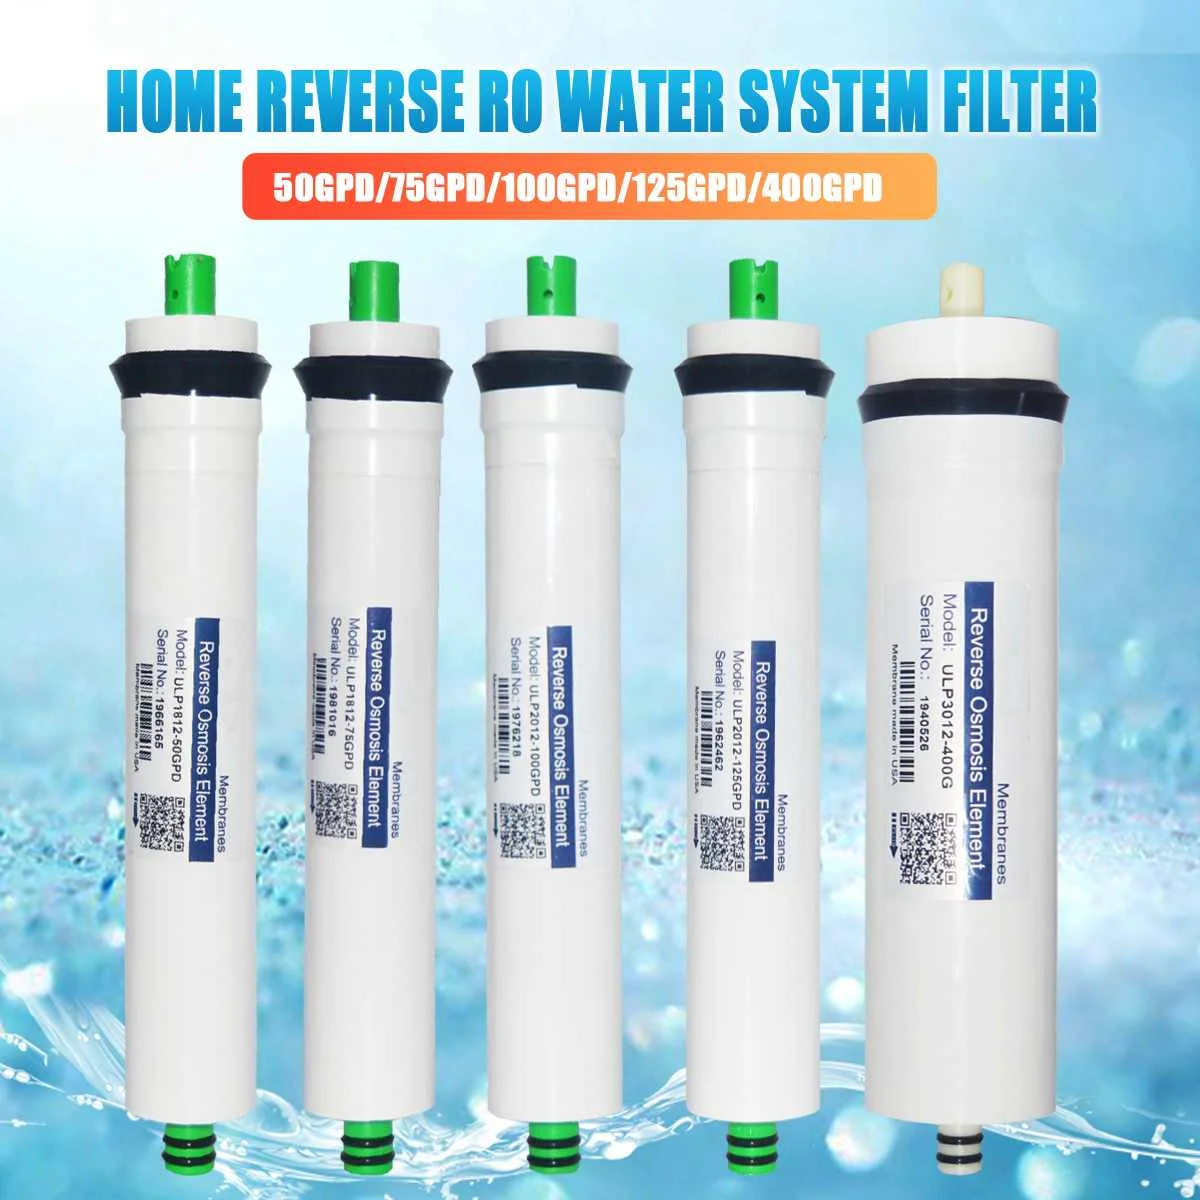 

50/75/100/125/400GPD Home Kitchen Reverse Osmosis RO Membrane Replacement Filter Cartridges Water System Filter Water Purifing